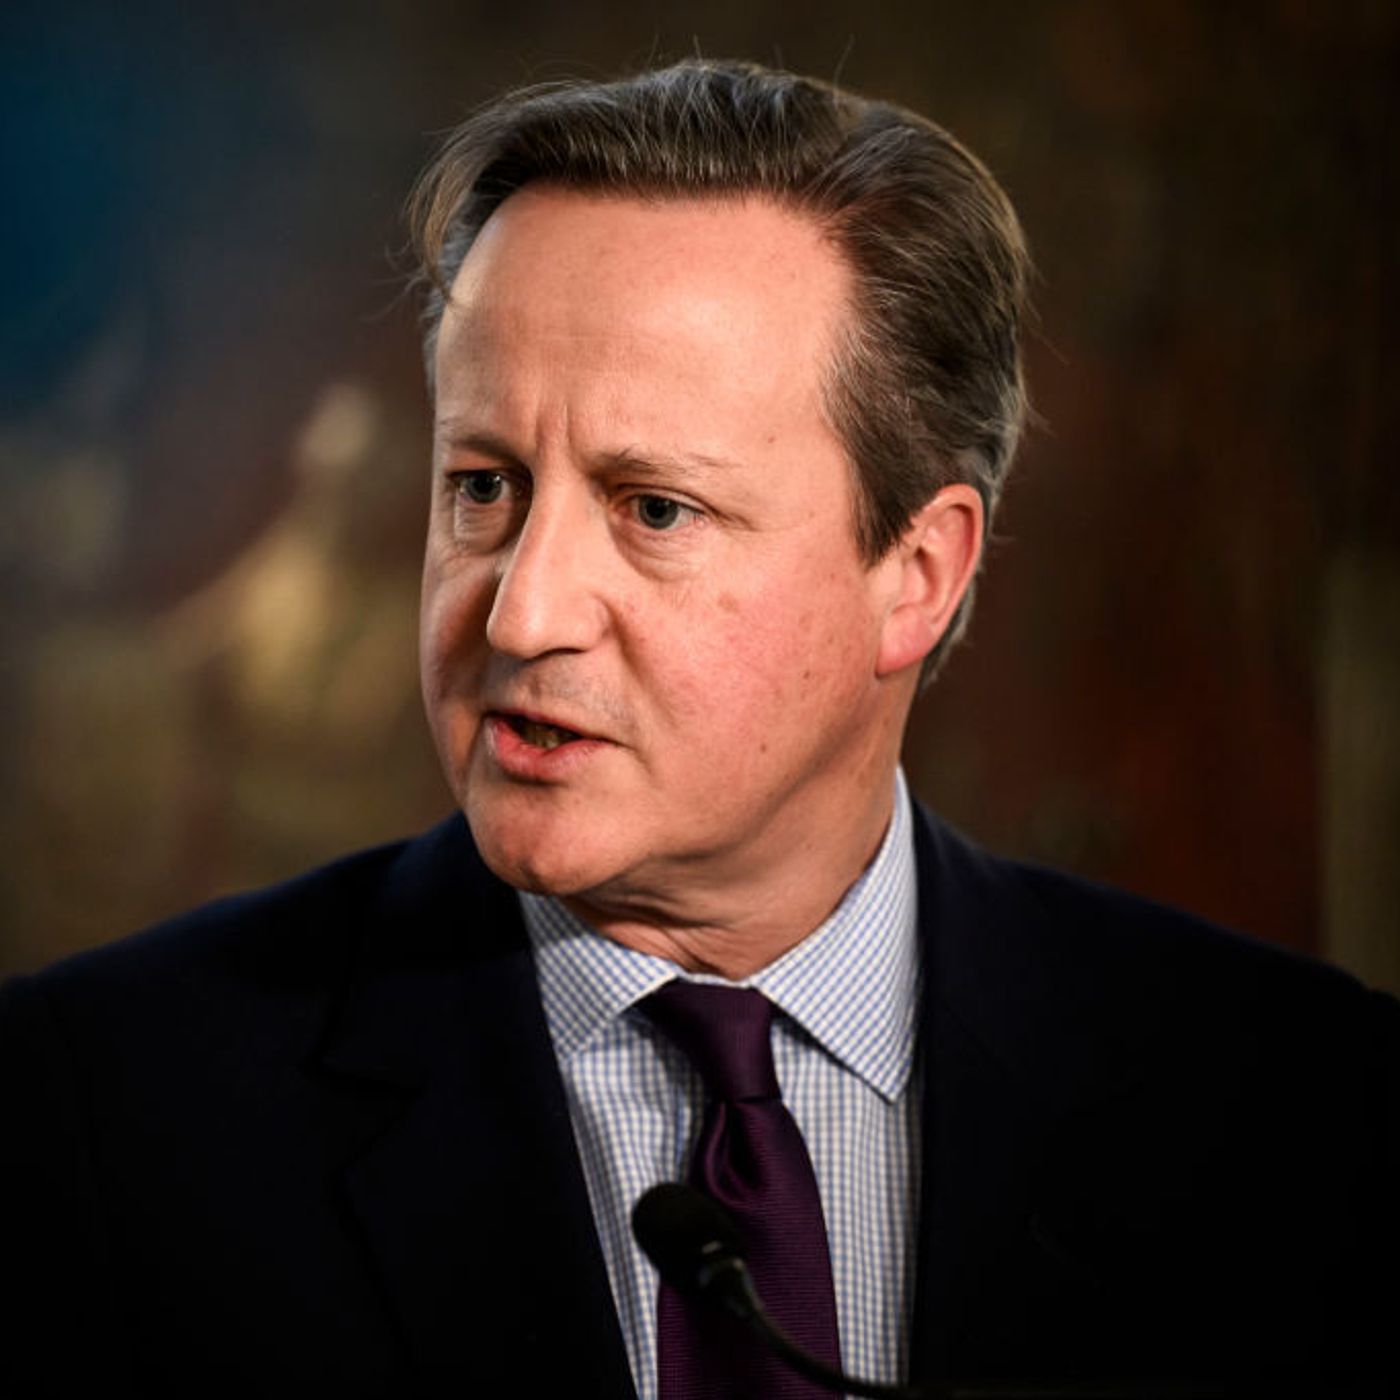 What do Republicans think of Lord Cameron?